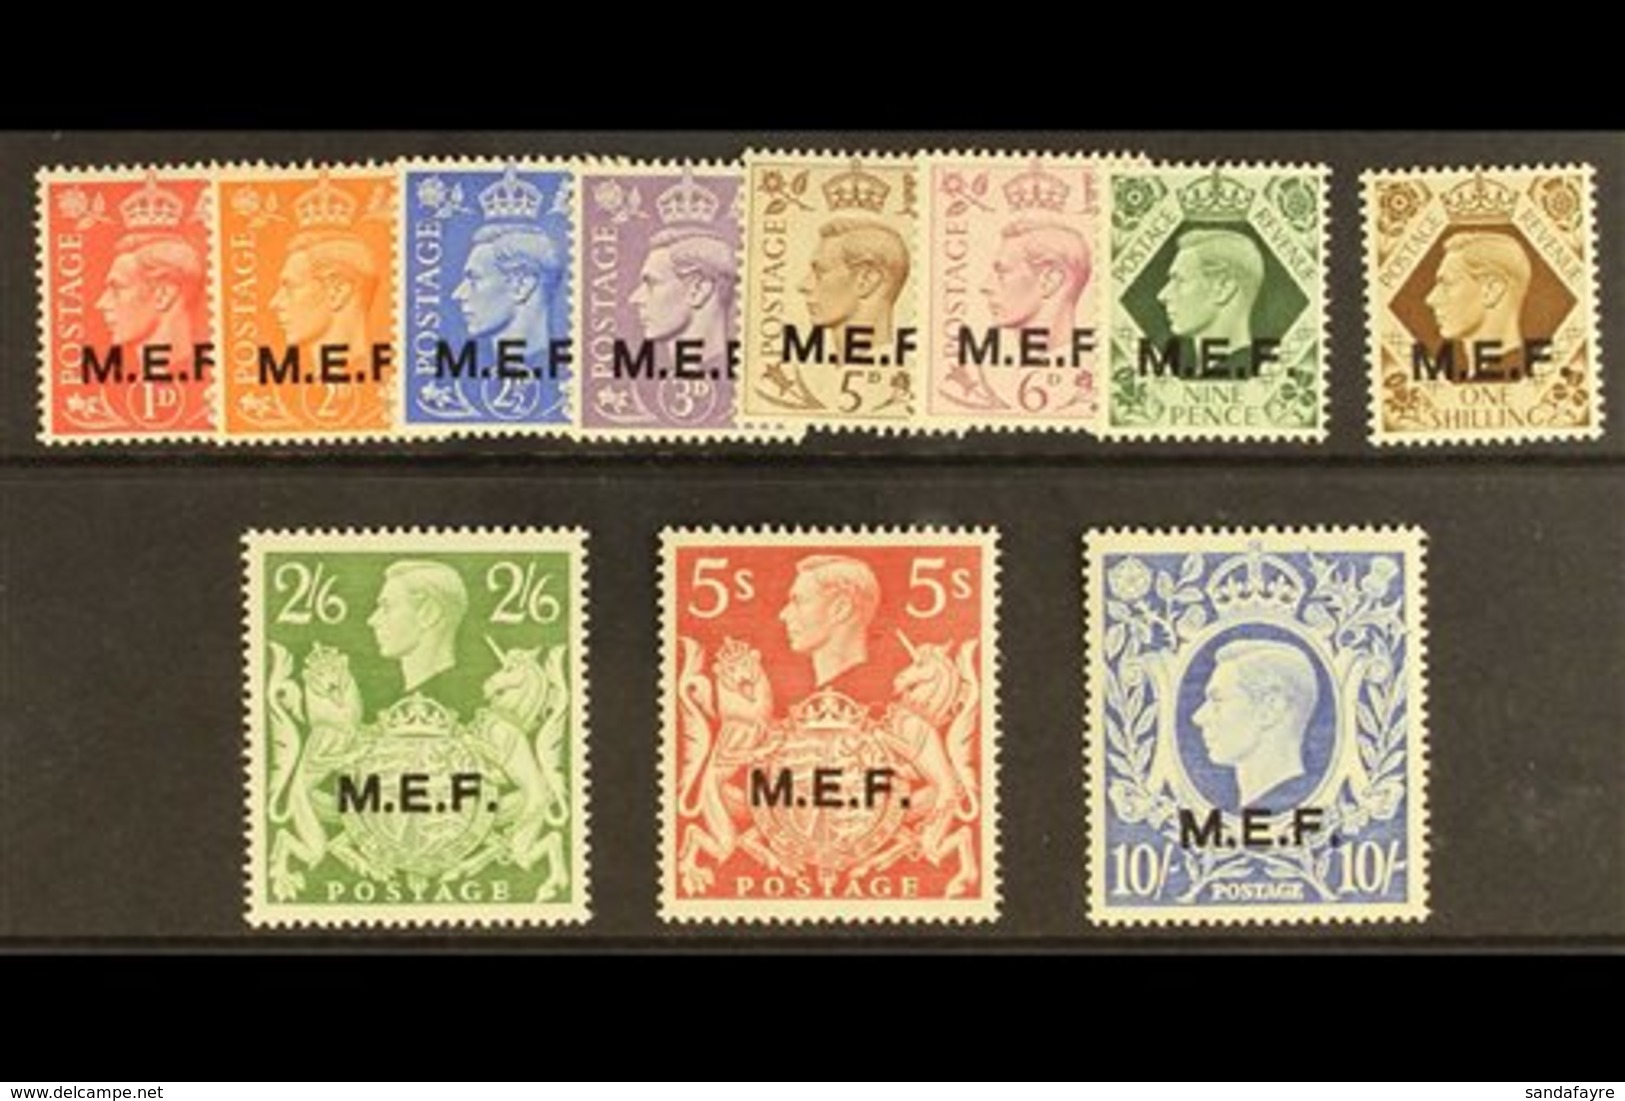 MIDDLE EAST FORCES  1943-47 "M.E.F." Overprints Complete Set, SG M11/M21, Never Hinged Mint. (11 Stamps) For More Images - Afrique Orientale Italienne